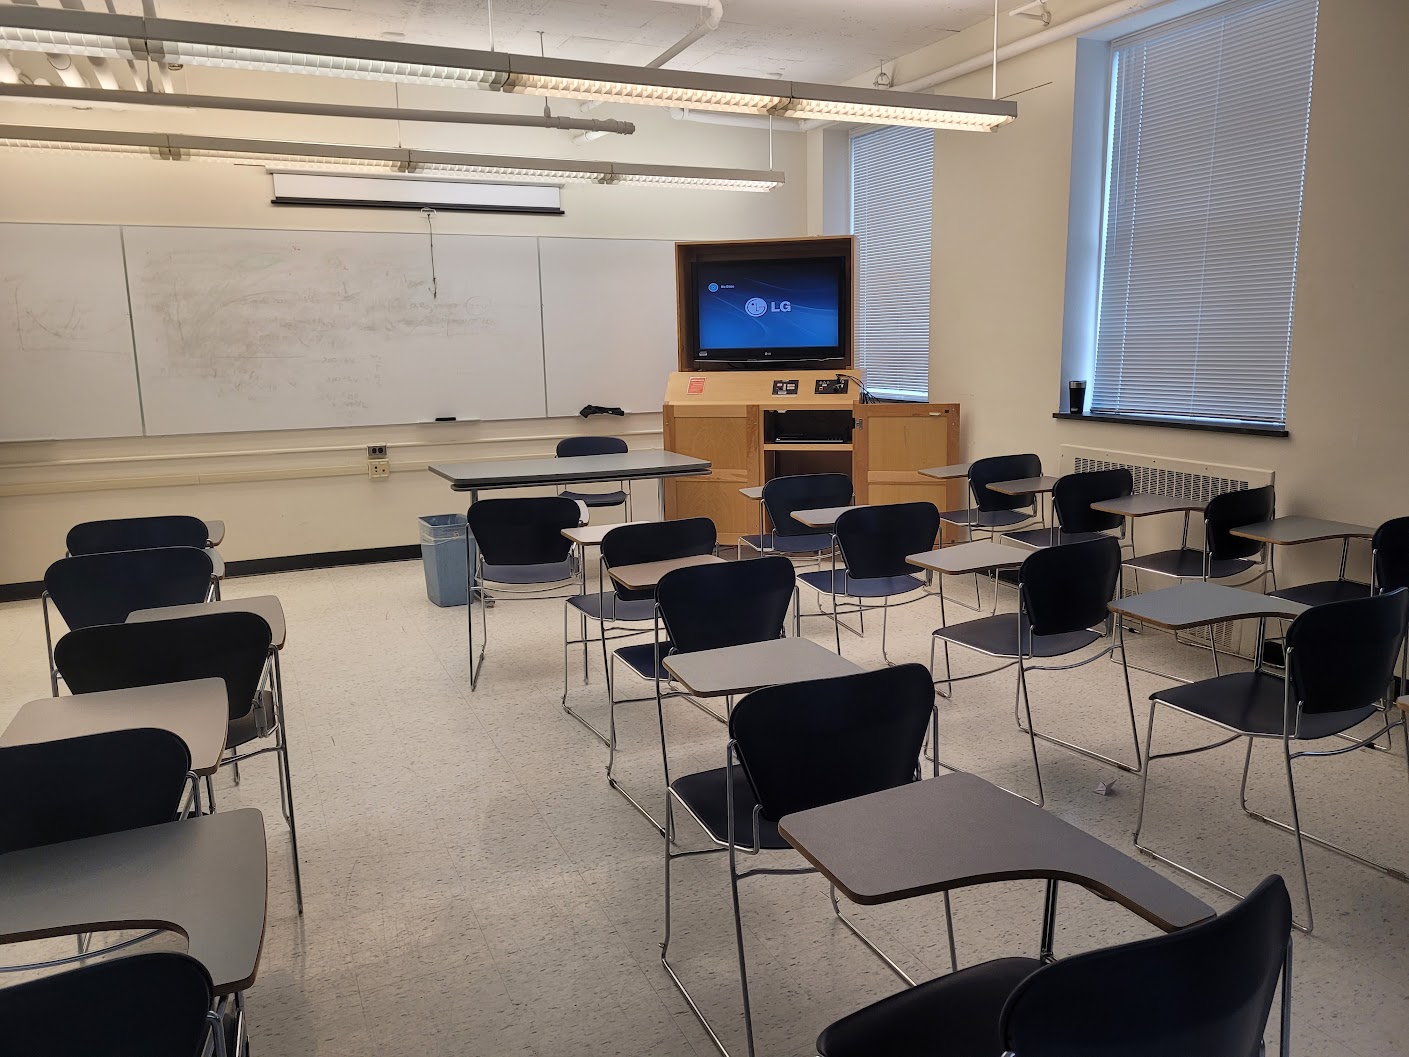 A view of the classroom with movable tableted arm chairs, white board, and instructor station in front.